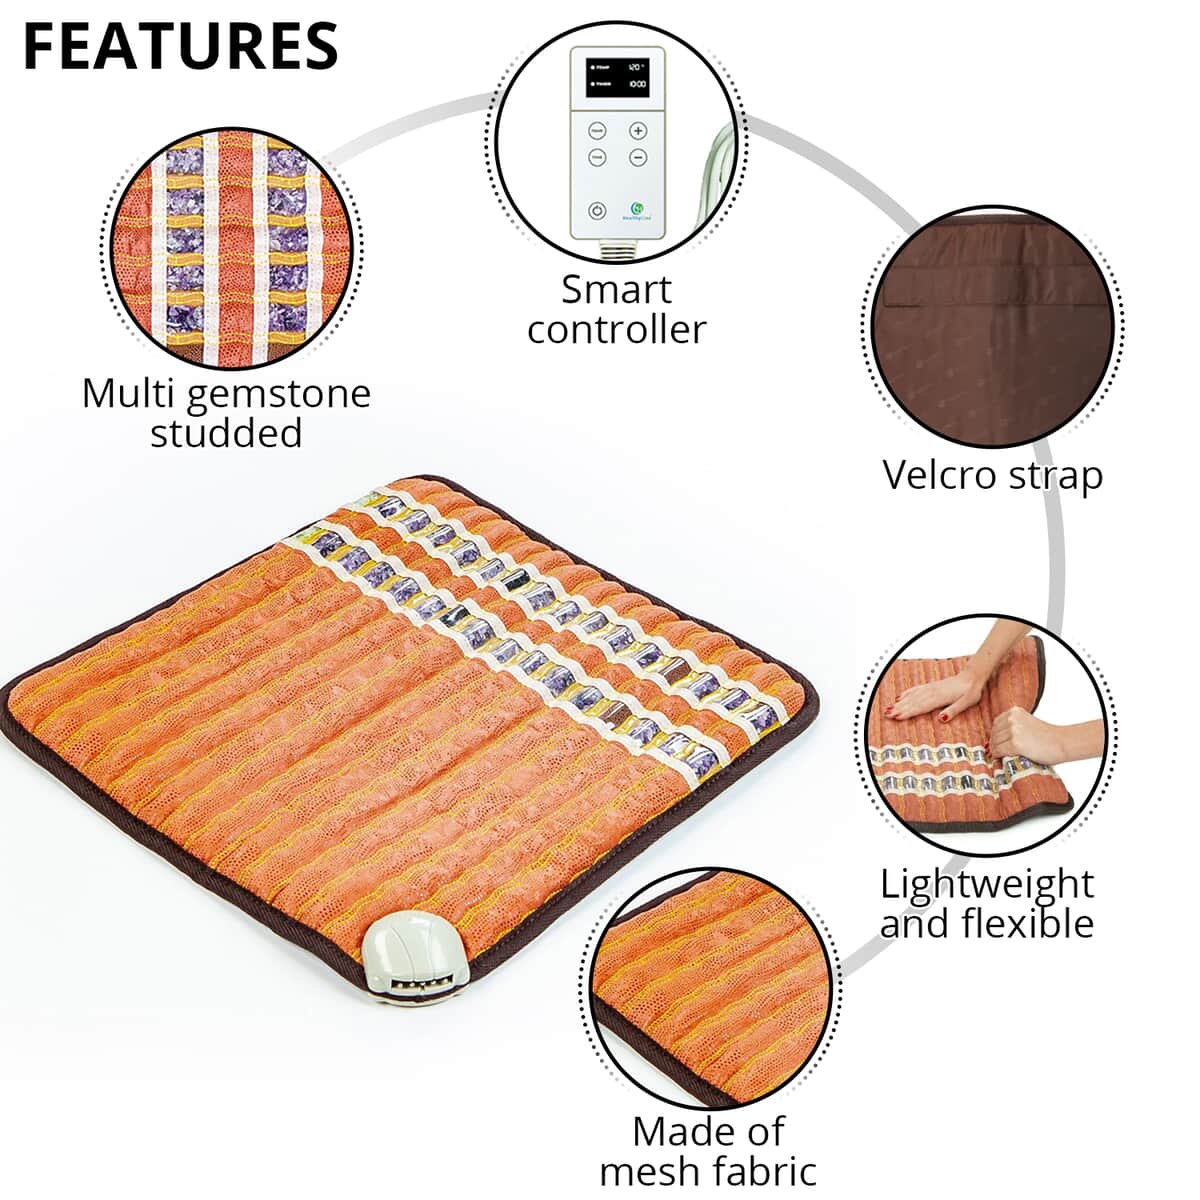 HealthyLine Mesh Multi Gemstone TAO-Mat Heating Pad | Best Electric Portable Heating Pad | Infrared Heating Pad for Back Pain image number 2